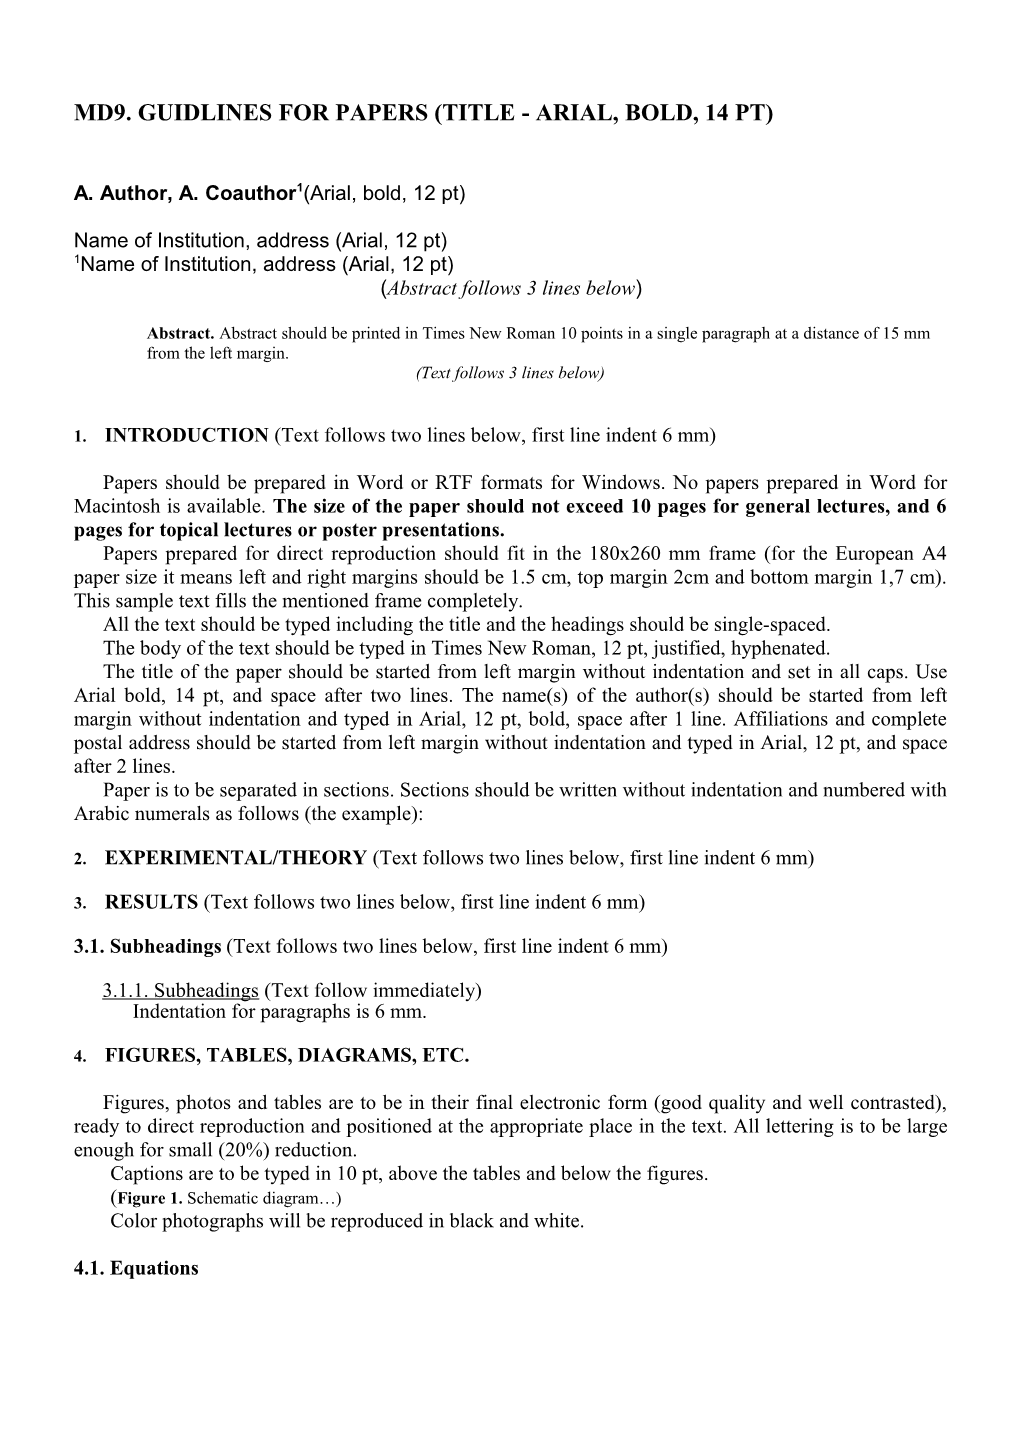 GUIDLINES for TEN-PAGE PAPERS (Title - Arial, Bold, 14 Pt)